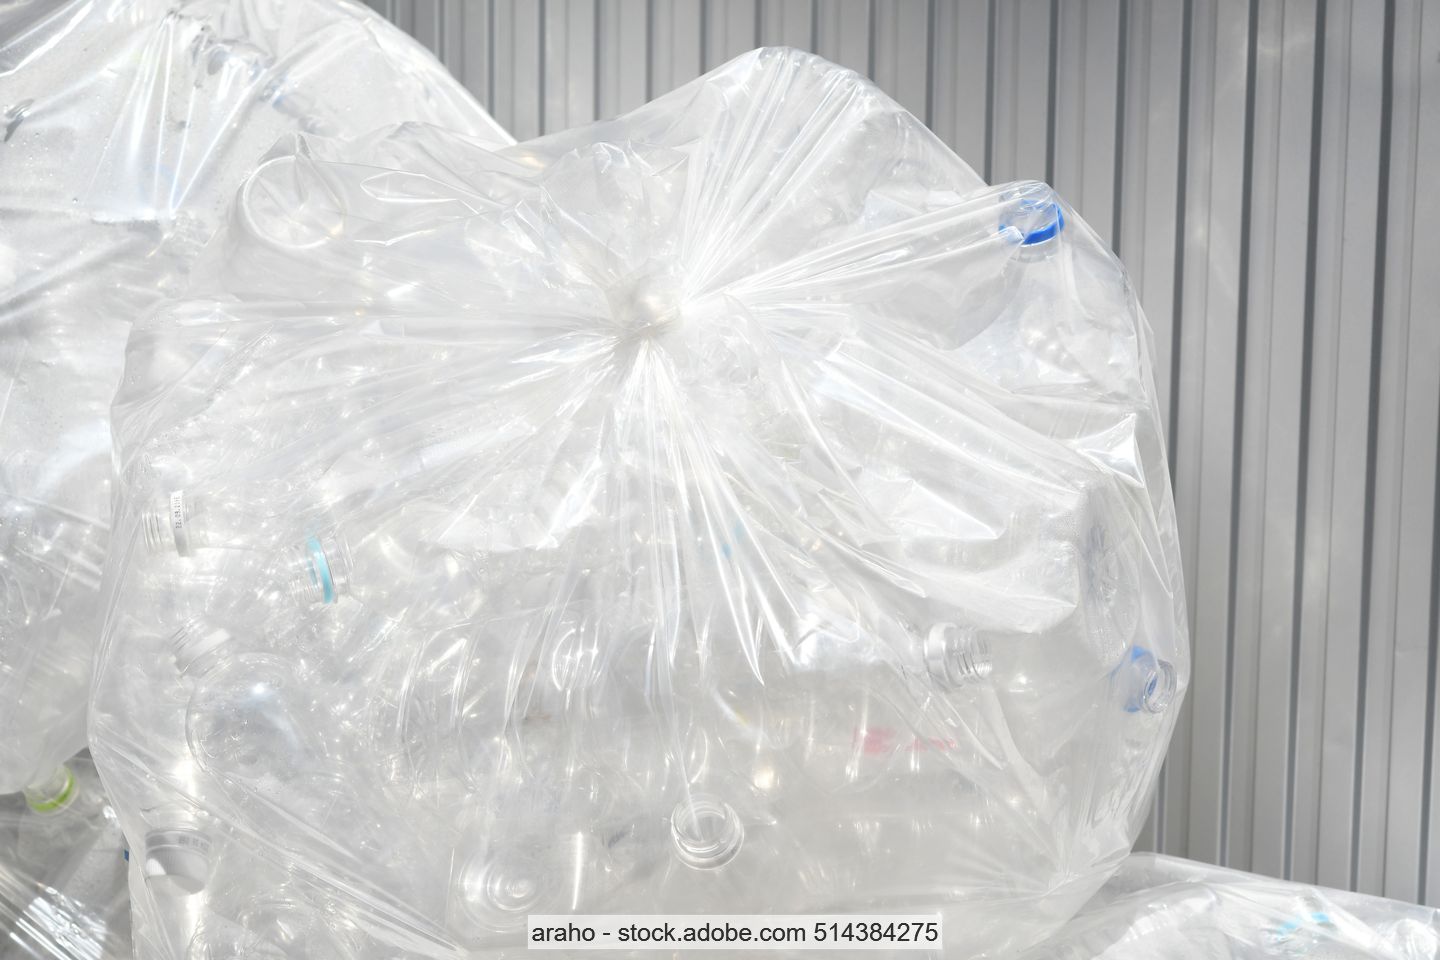 Two large transparent plastic bags containing empty clear PET bottles.